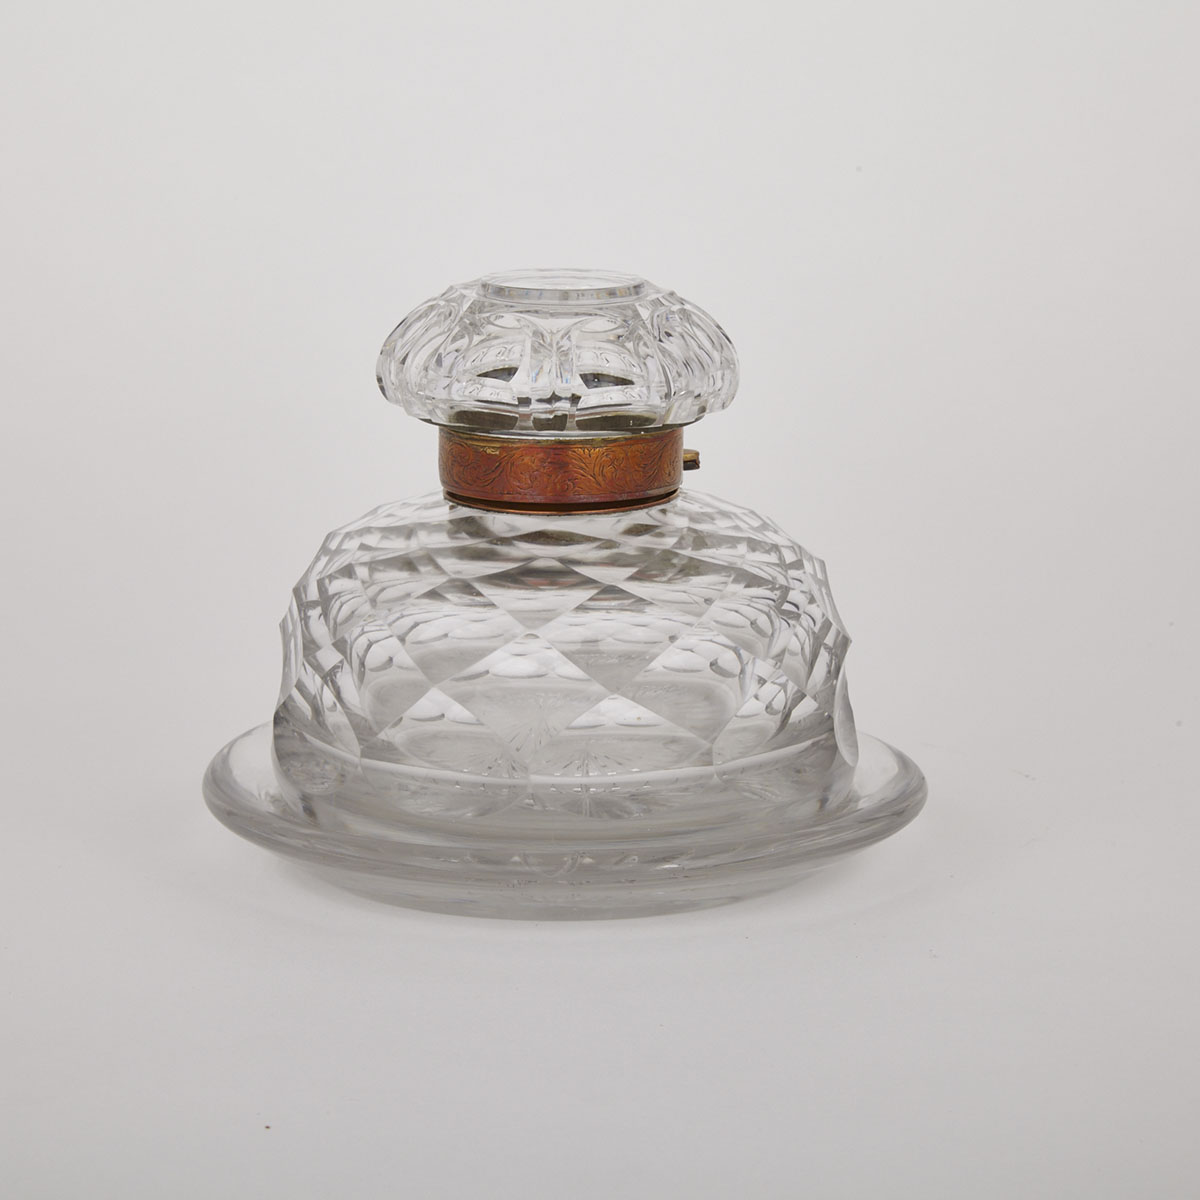 Large Cut Glass Ink Well, 19th century